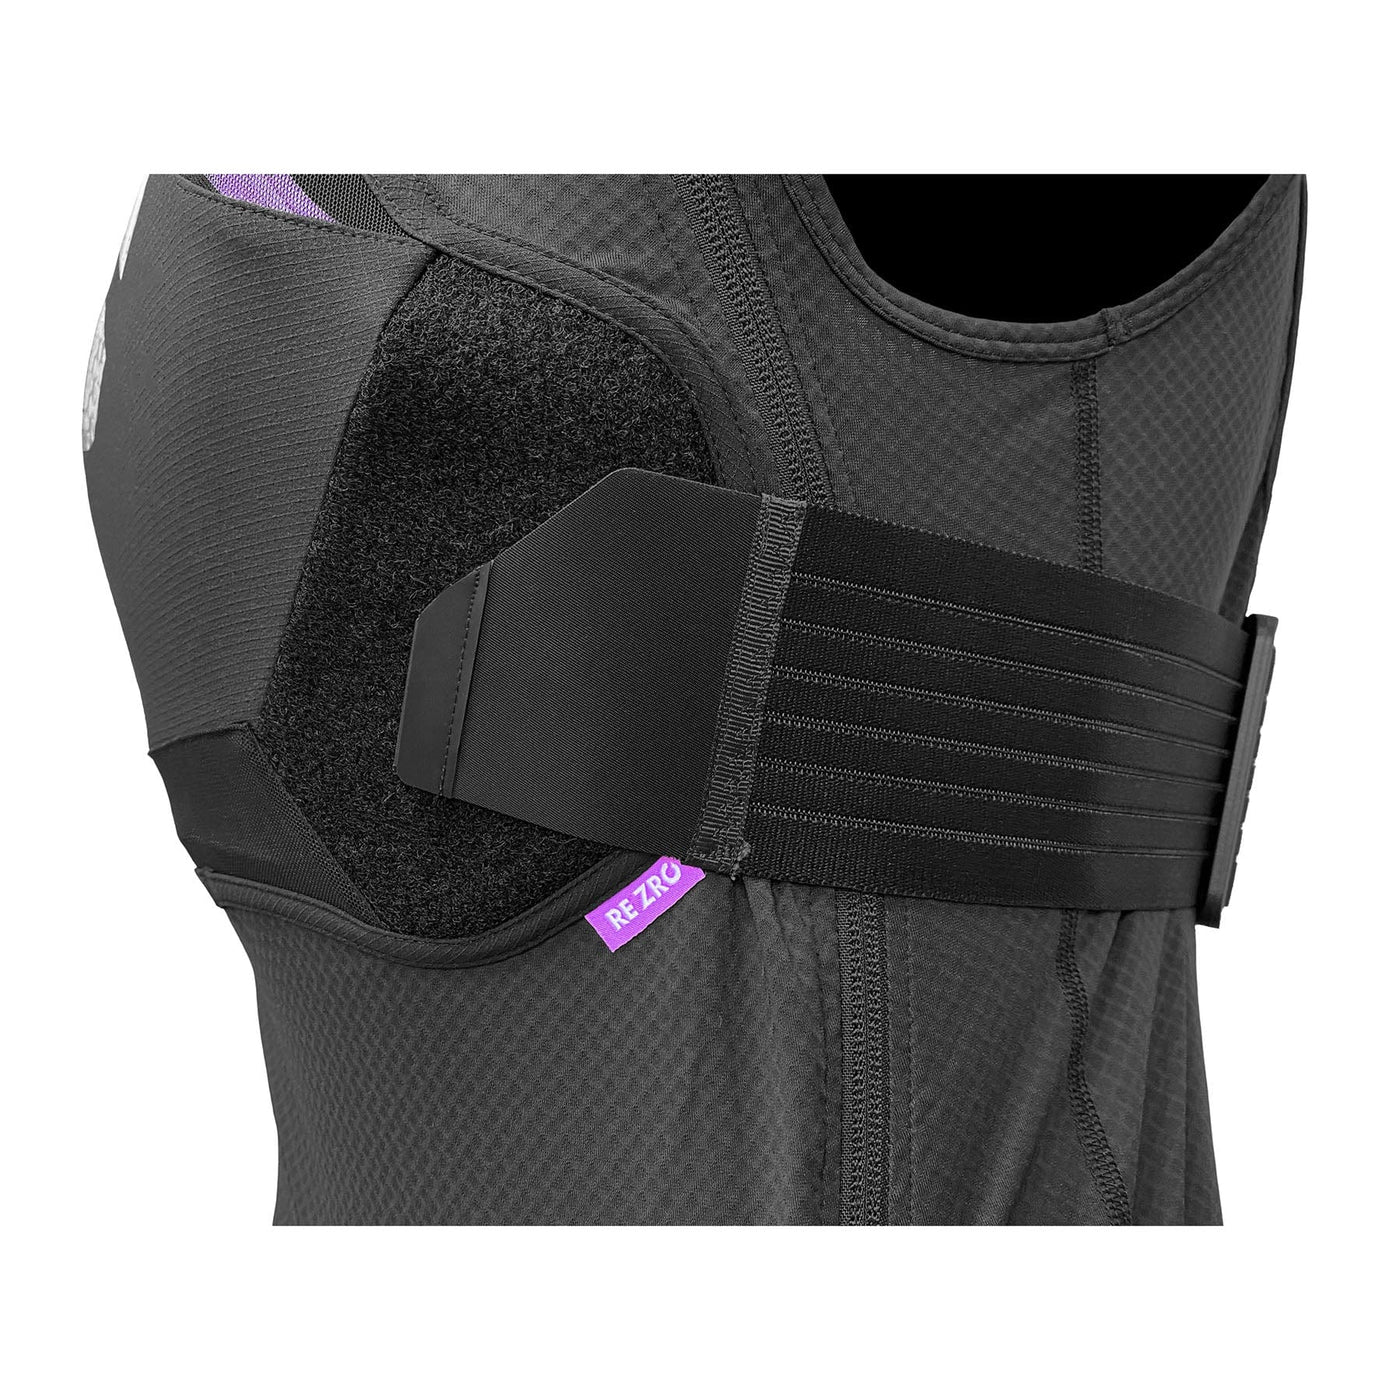 G-Form MX Spike Chest & Back Protector 8Lines Shop - Fast Shipping